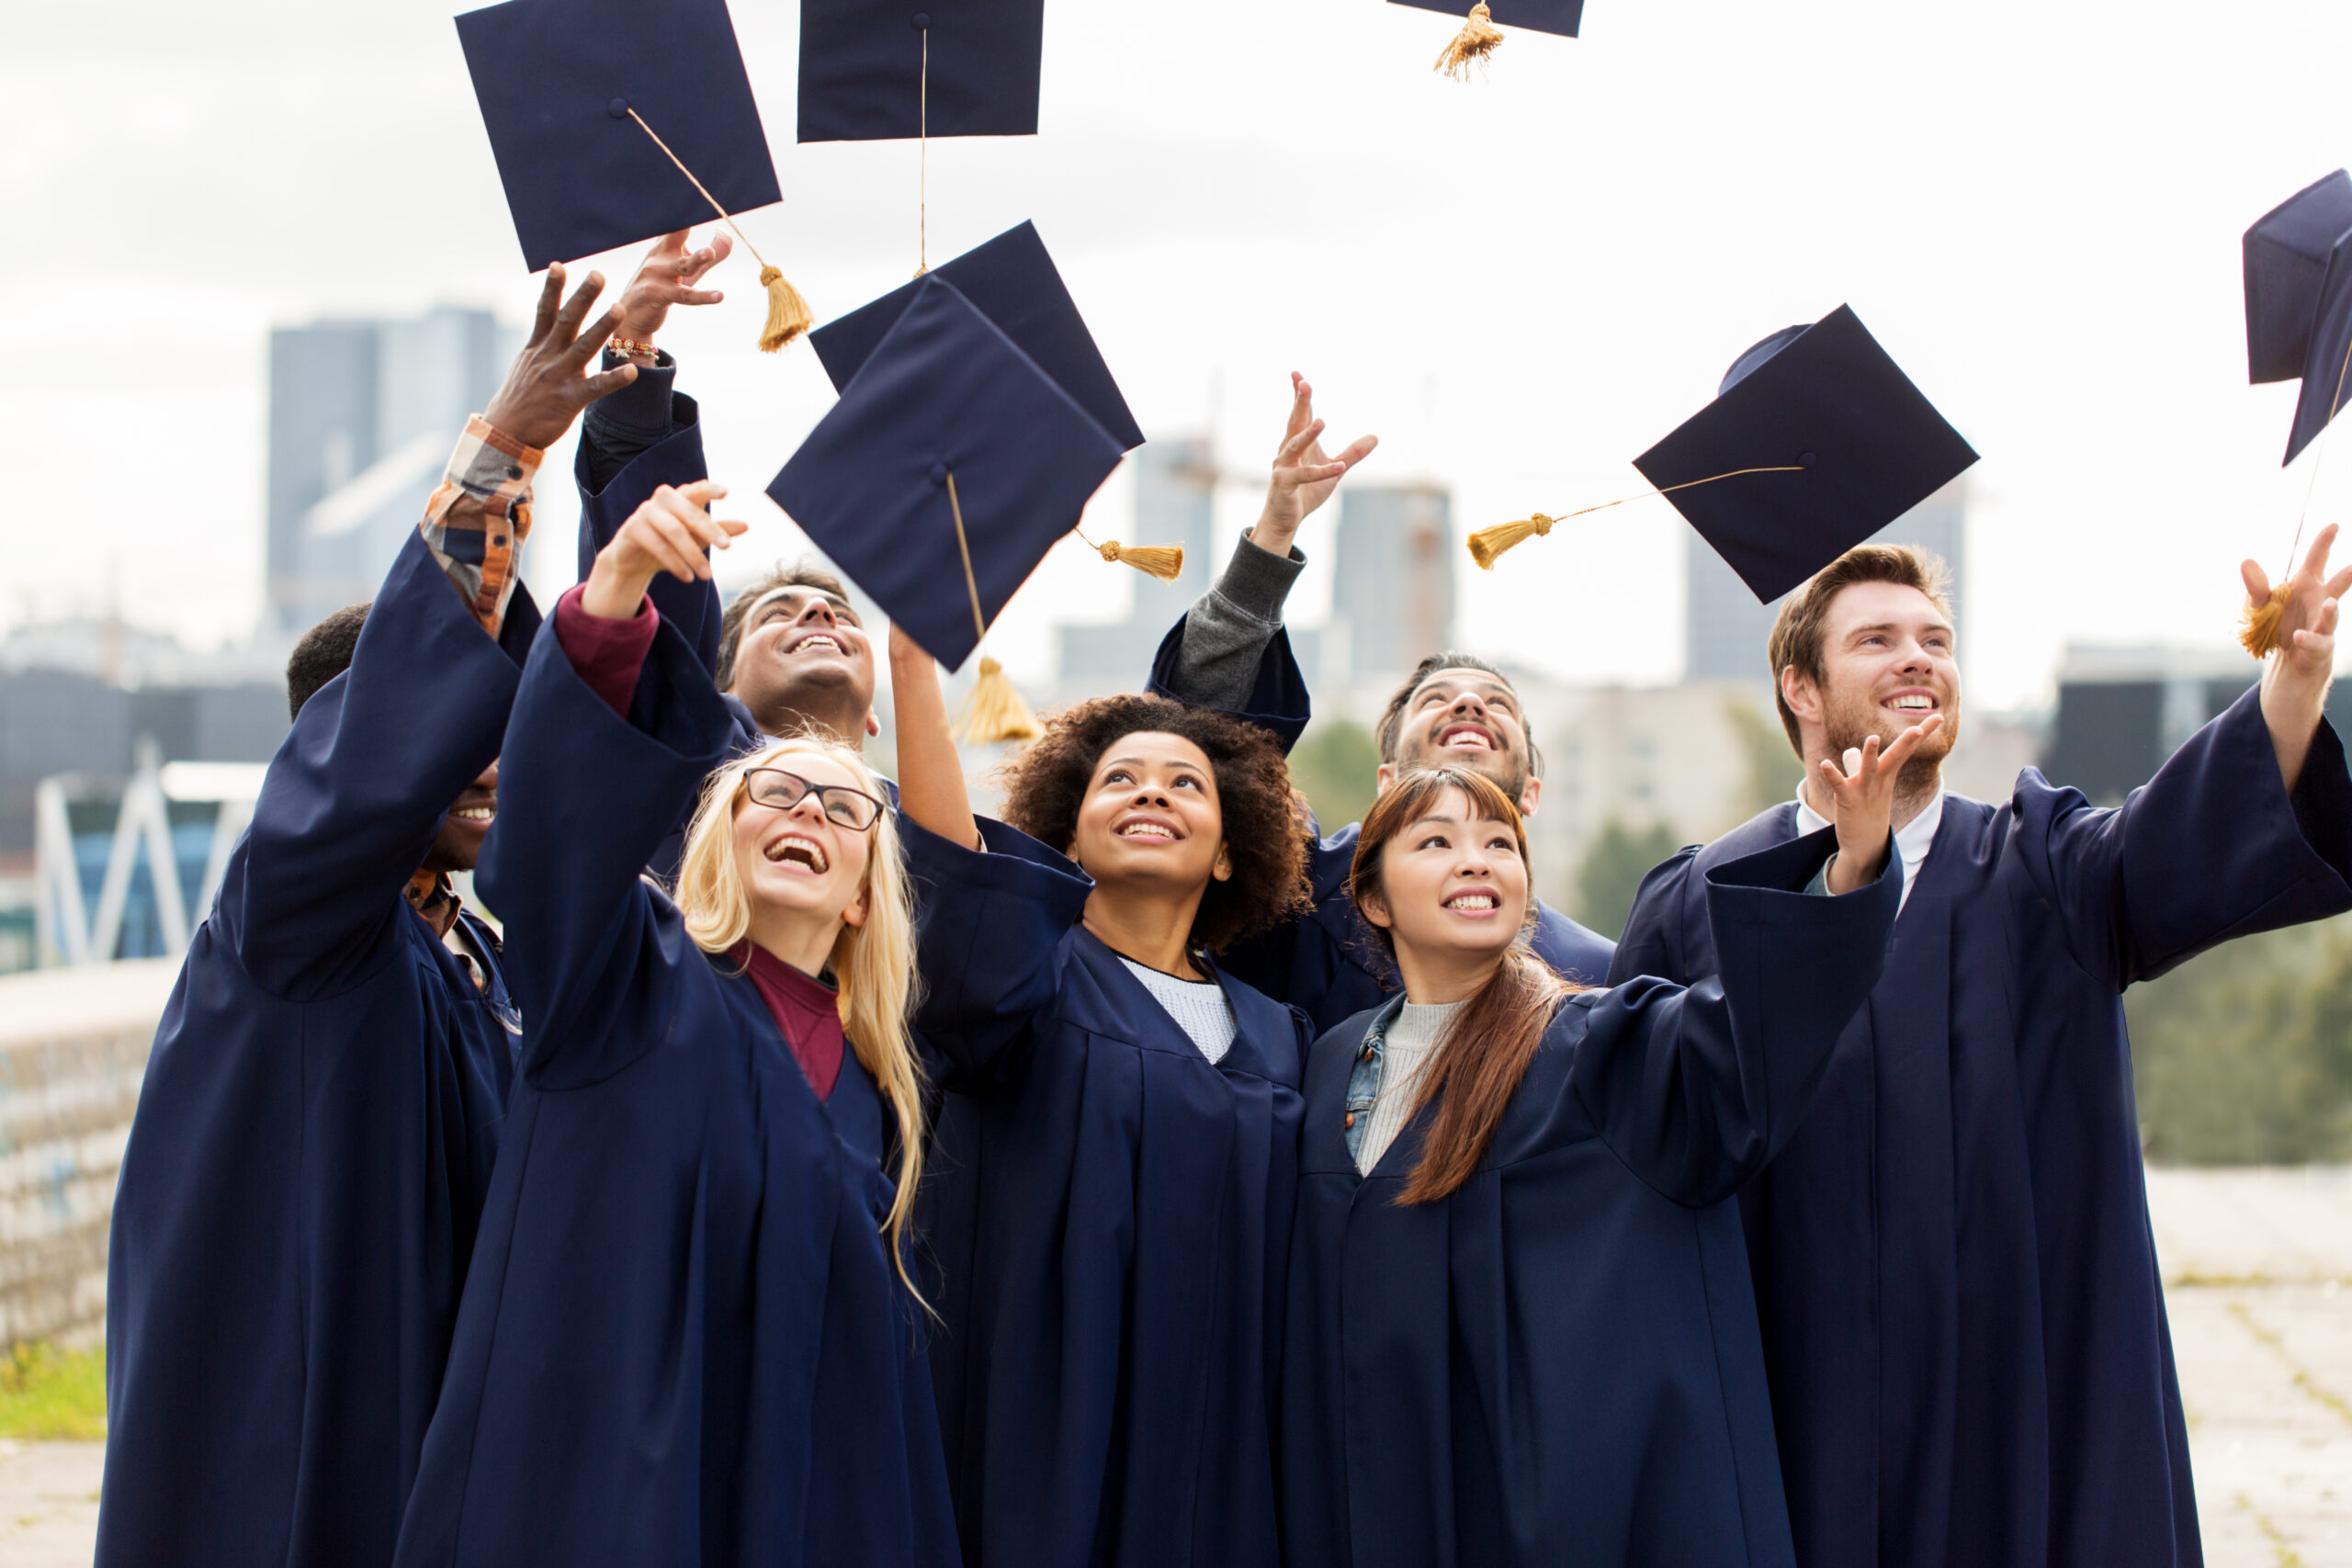 A group of graduates in blue gowns and caps celebrate outdoors by tossing their caps into the air. The background includes tall city buildings and a cloudy sky. The graduates appear joyful, with hands raised towards the caps.